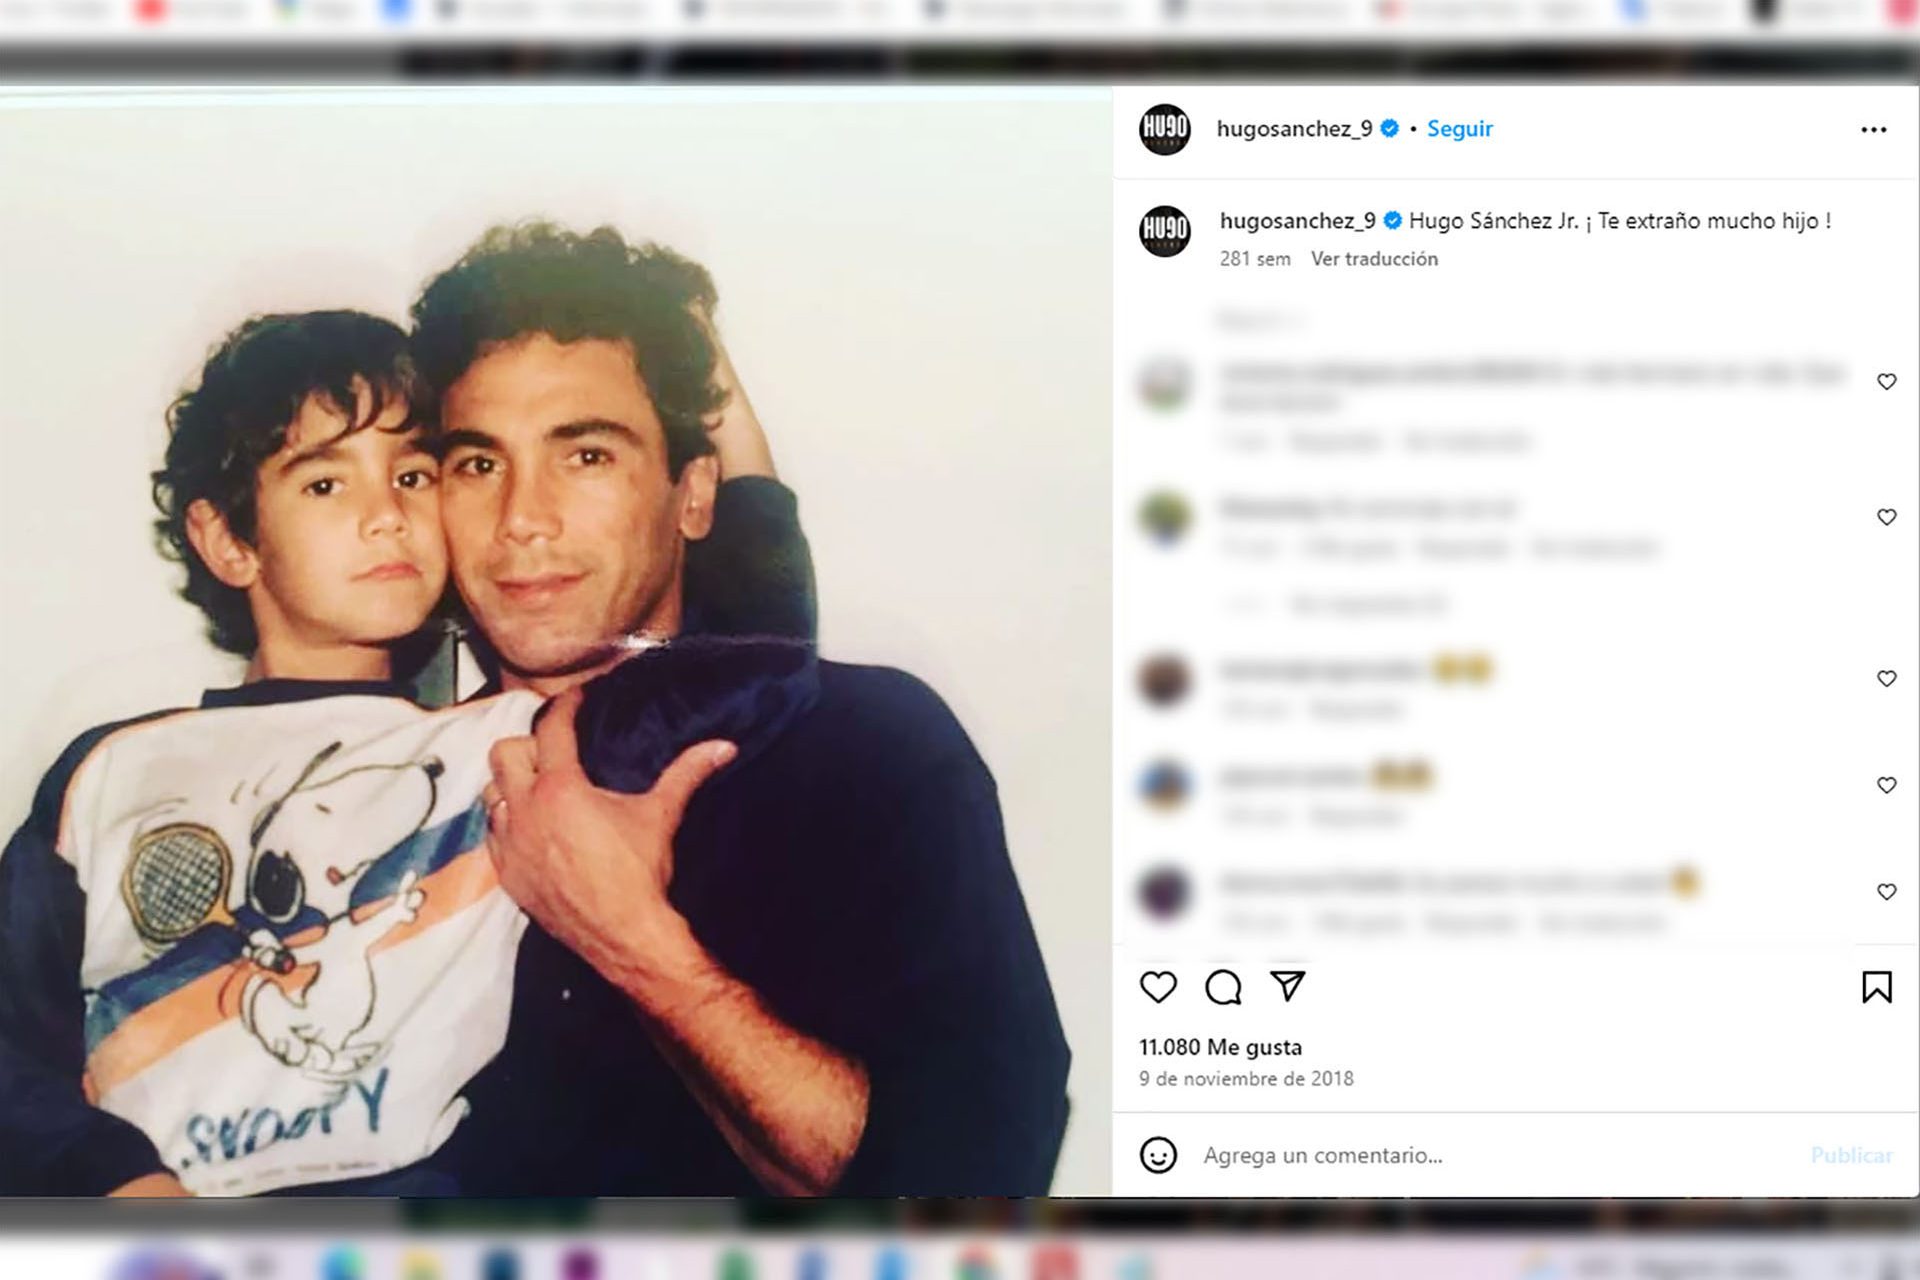 <p>Sánchez Portugal revealed these intimate details during his appearance on the Spanish program DEC. There, he candidly shared the hurdles his father had erected, hindering rather than facilitating his journey in a realm where the elder Sánchez had etched his name in history.</p> <p>Image: Official Instagram of Hugo Sánchez (@hugosanchez_9)</p>